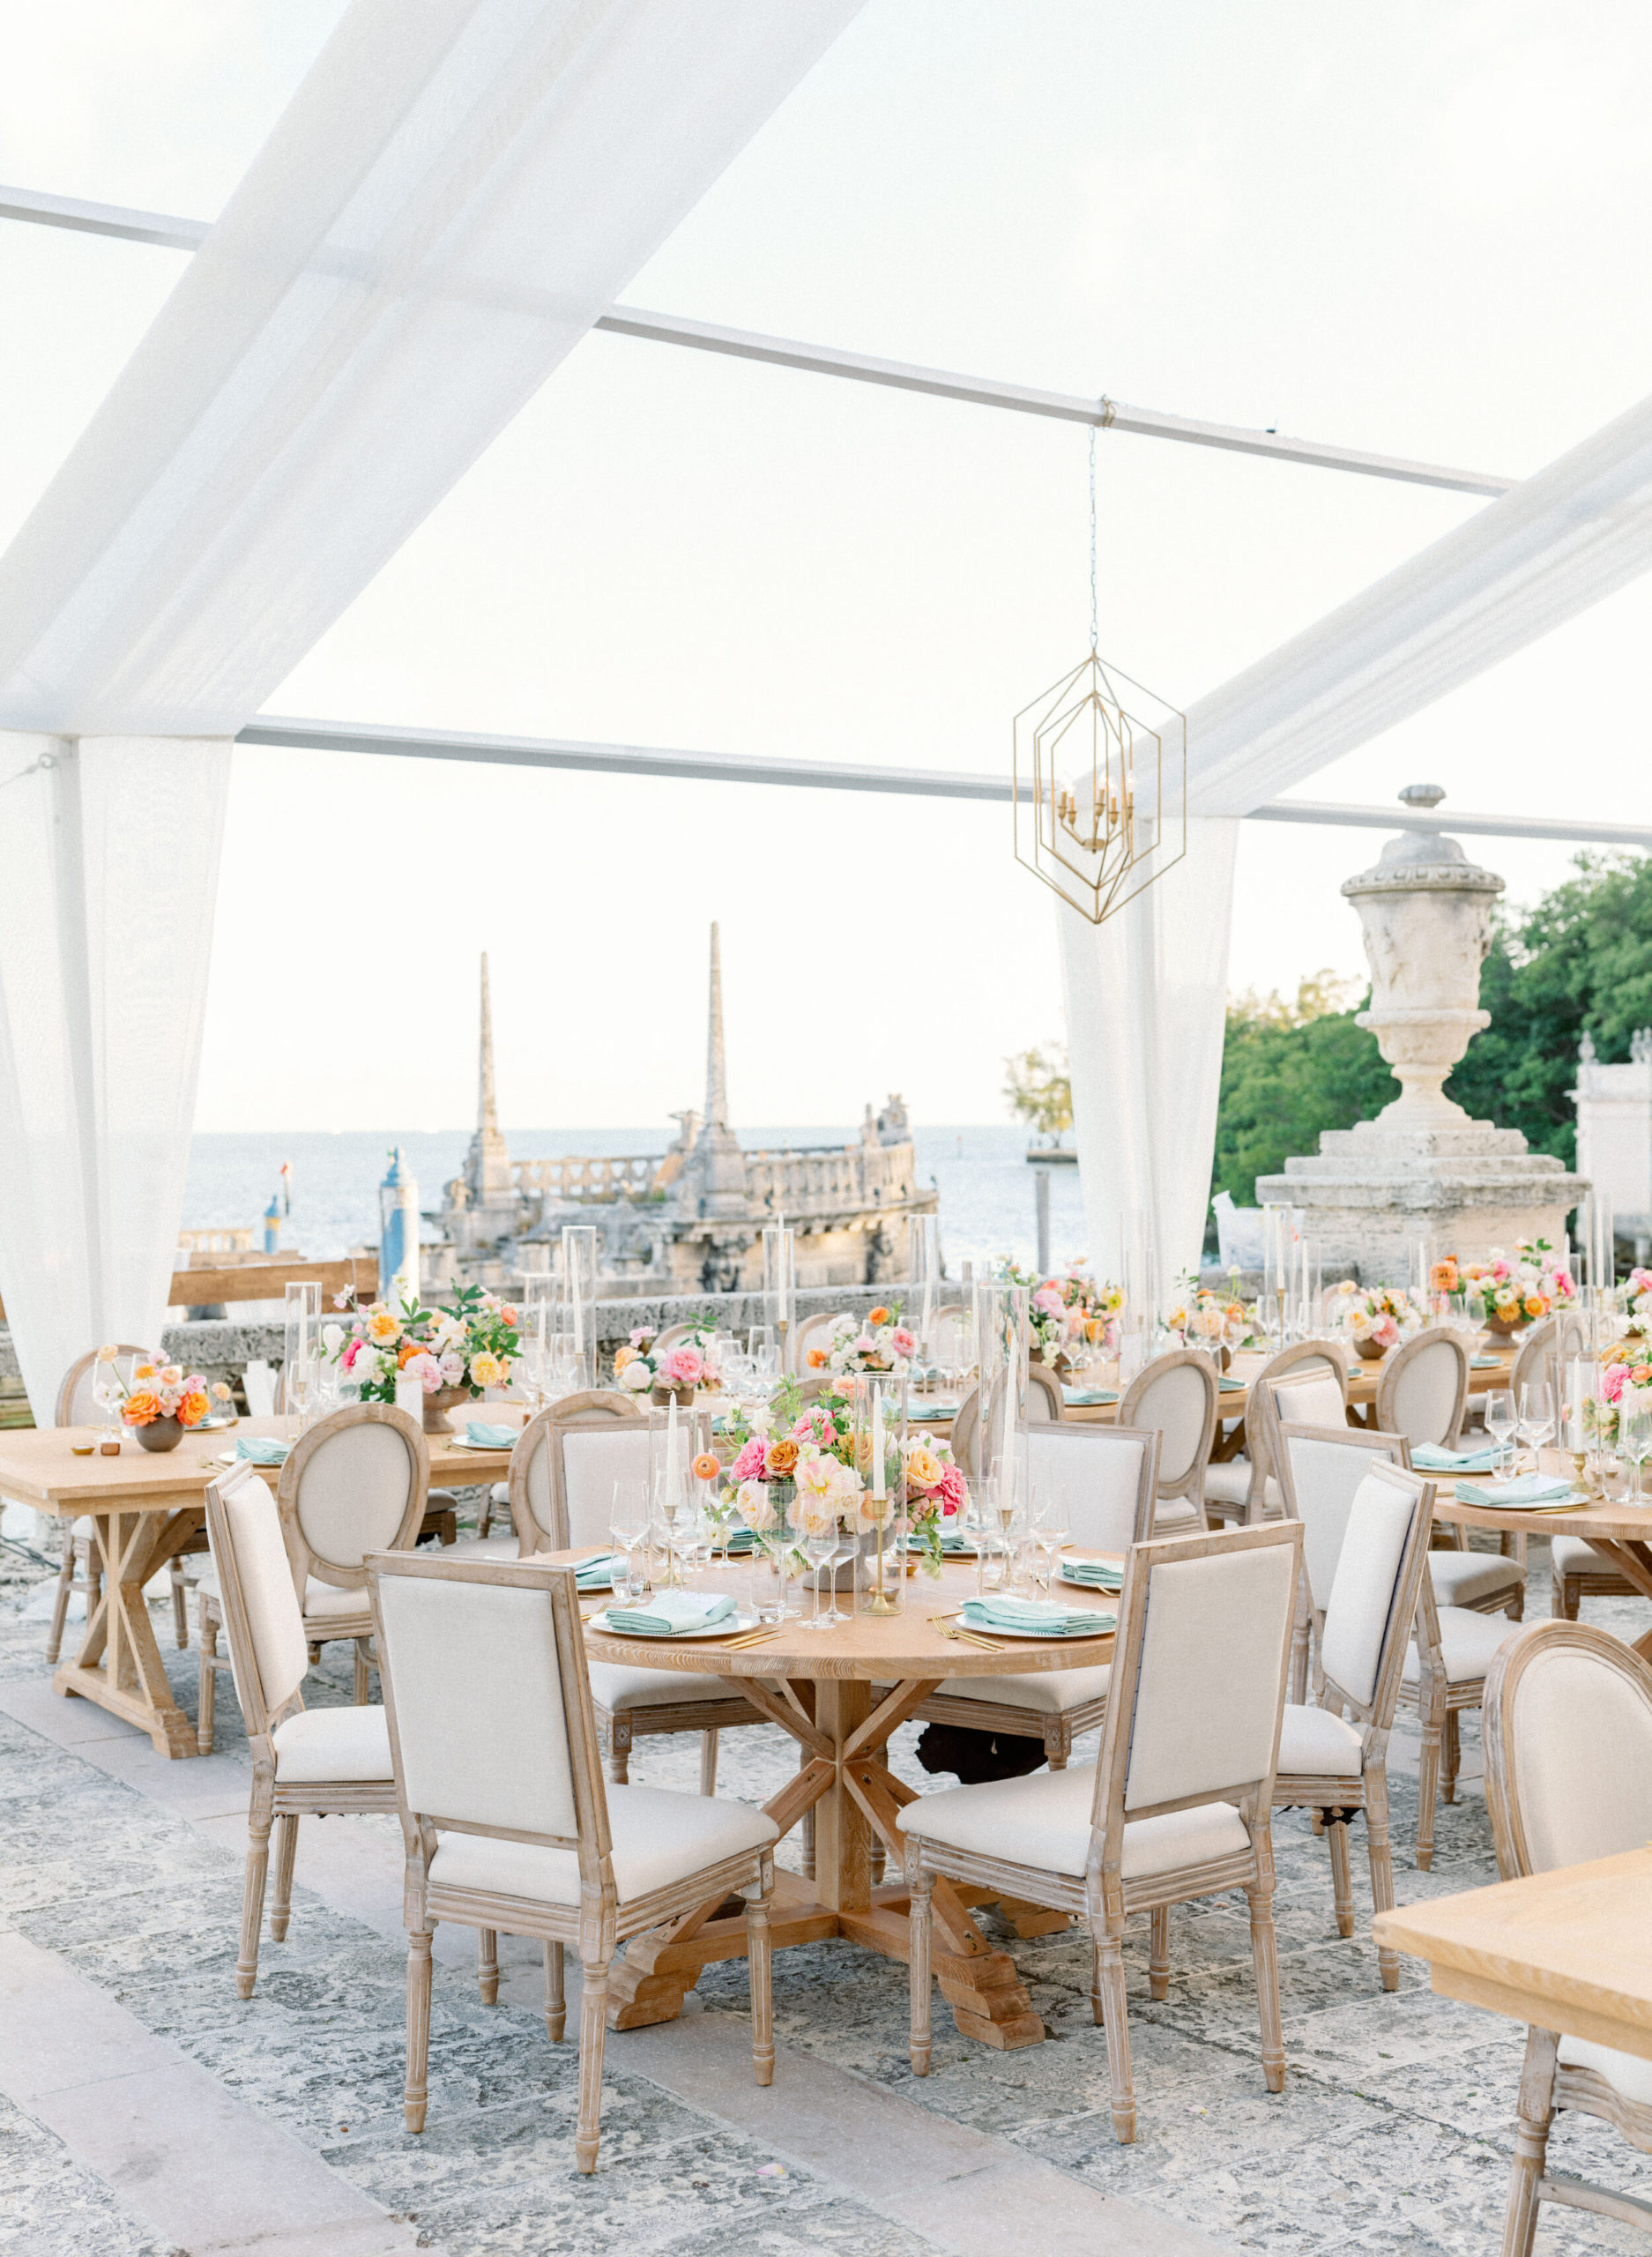 elegant, whimiscal wedding reception on the water at Vizcaya Museum